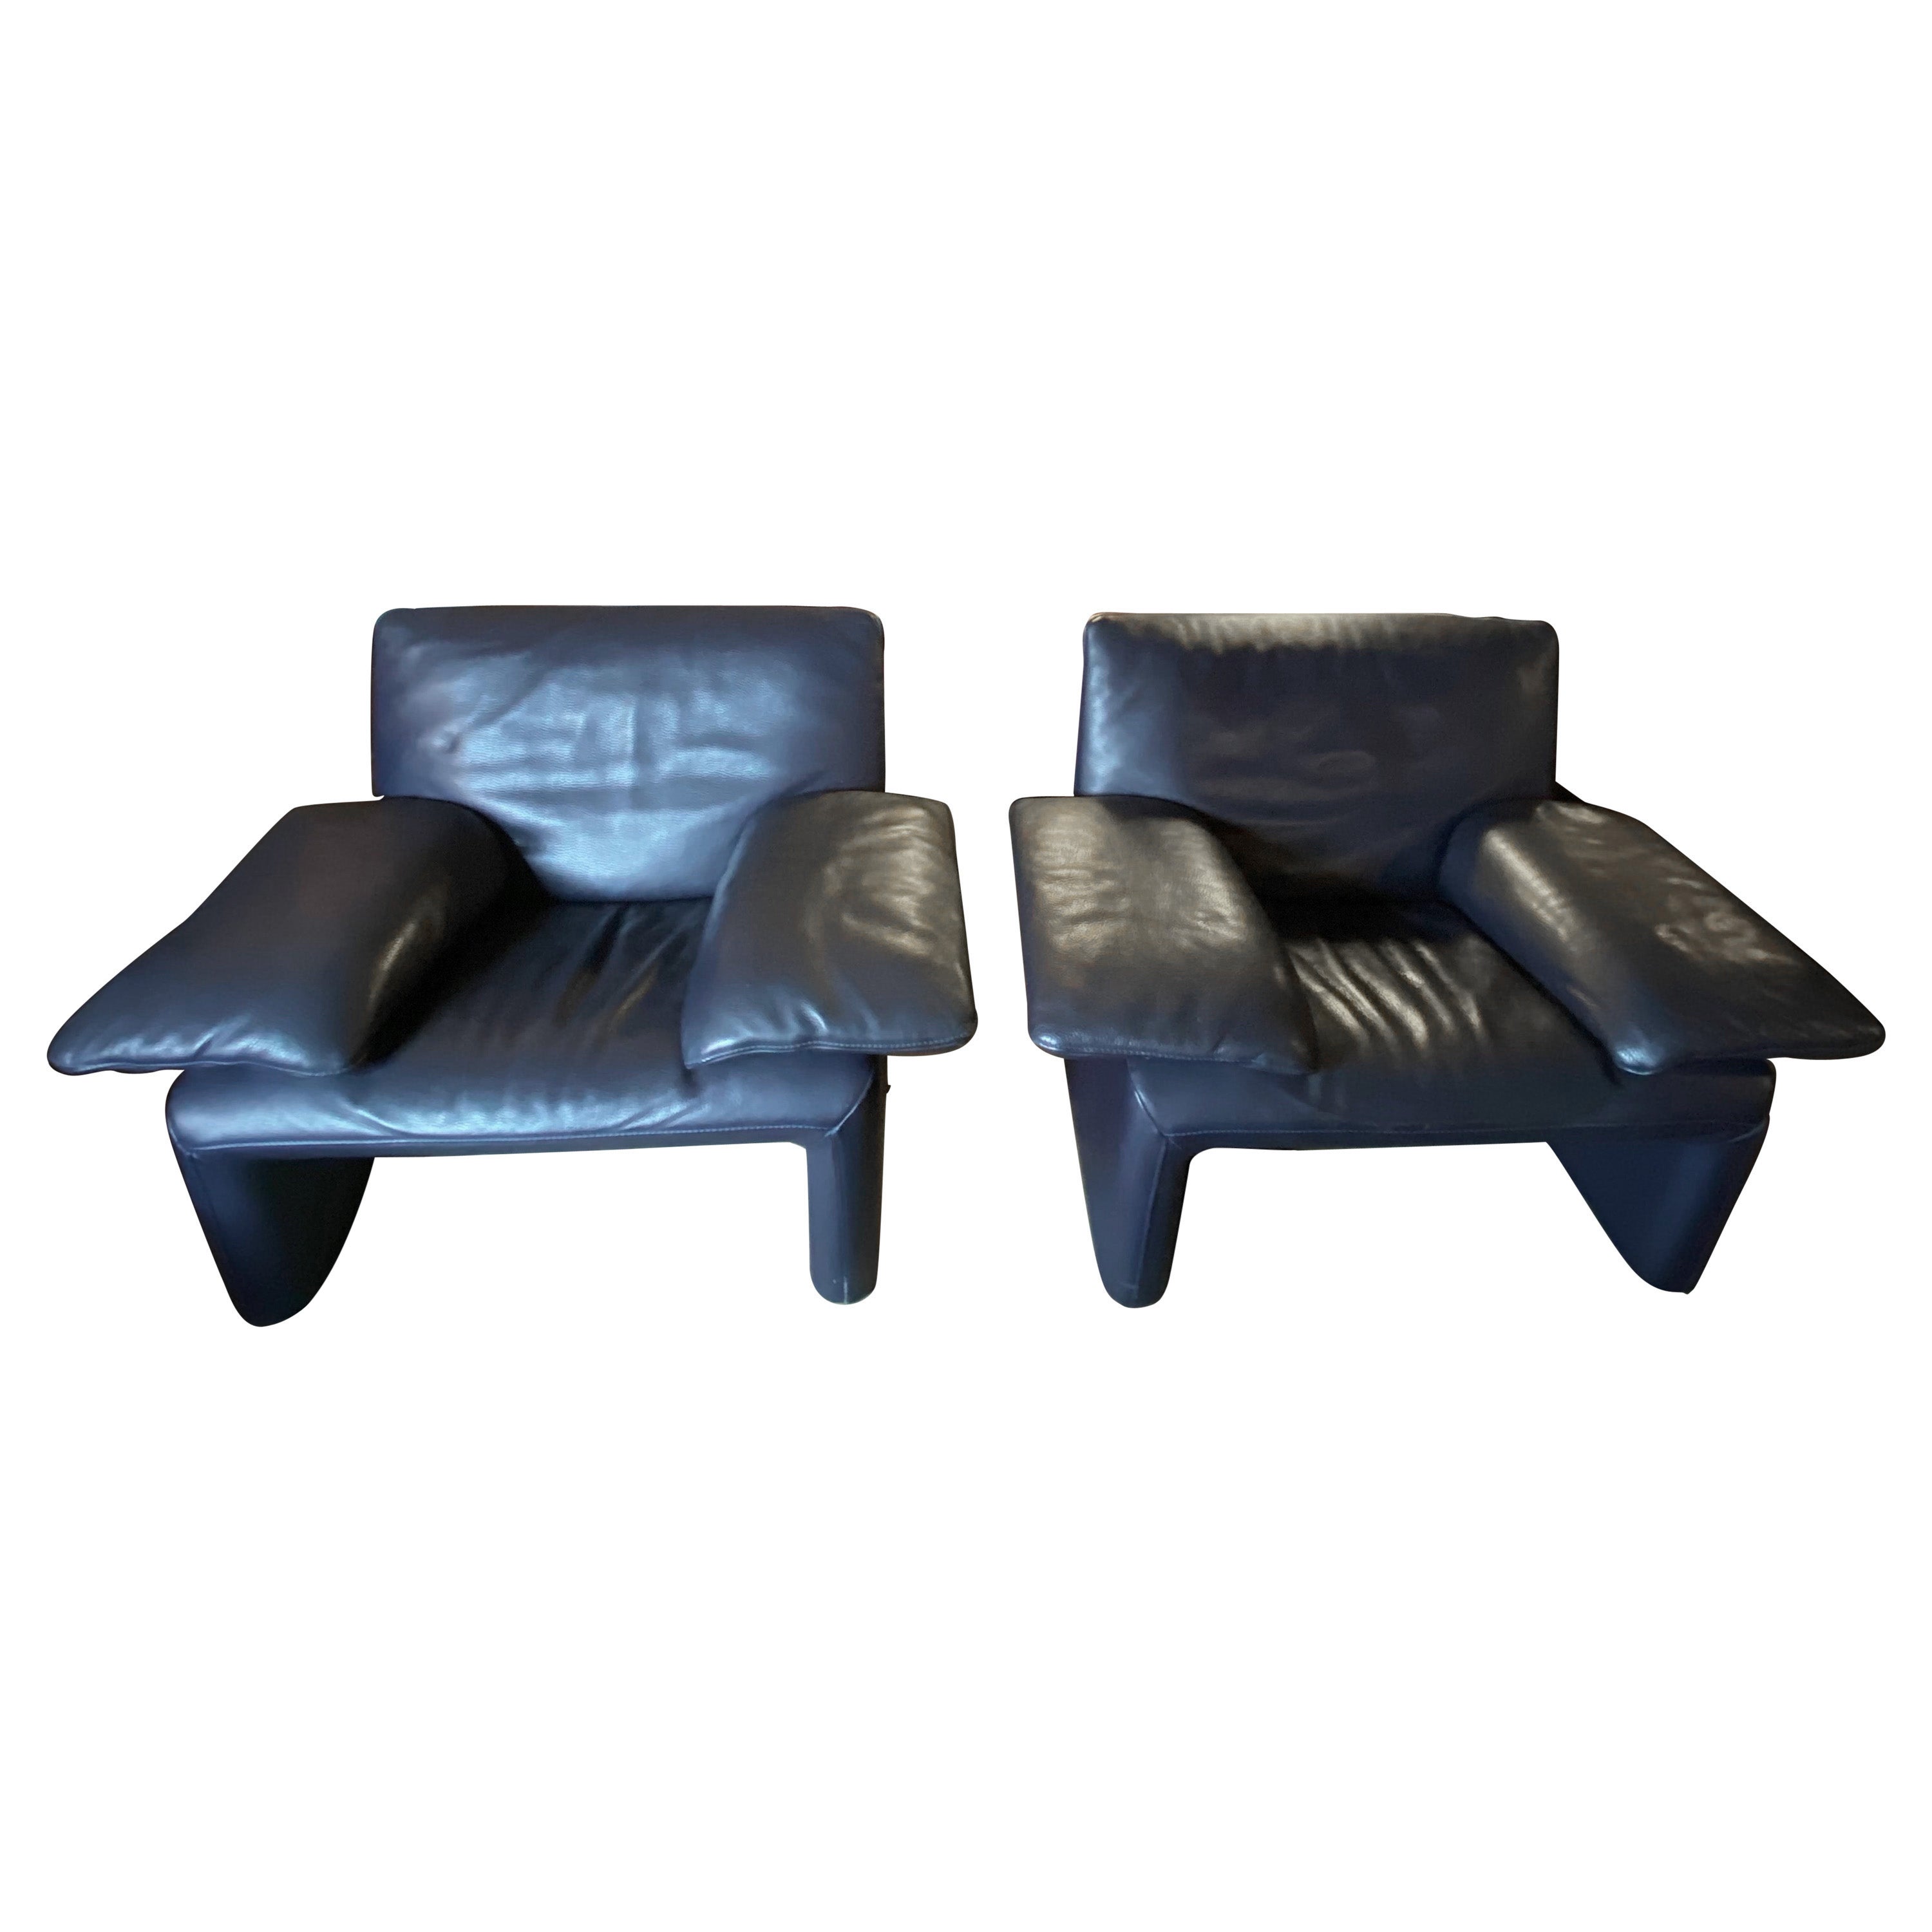 Pair of Vintage Leather Lounge Chairs, Belgium, 1990s